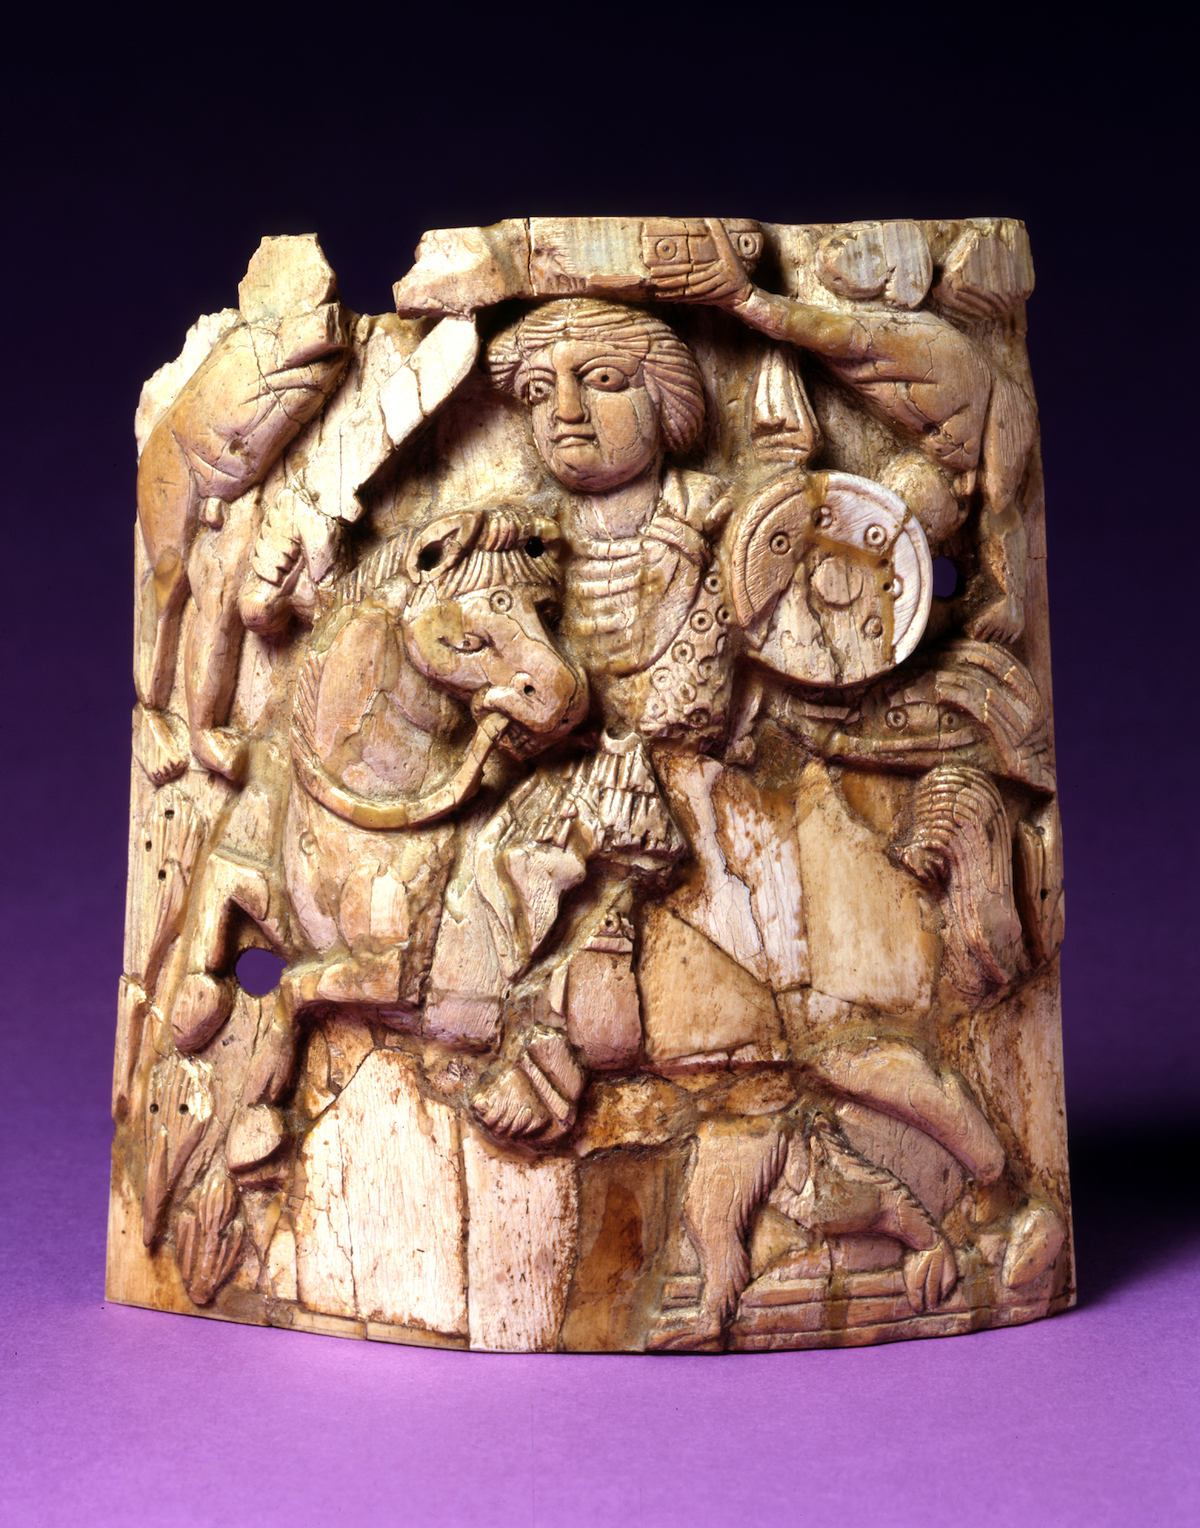 A victorious Byzantine emperor, Egyptian ivory relief, c. 7th century. Walters Art Museum (CC0).